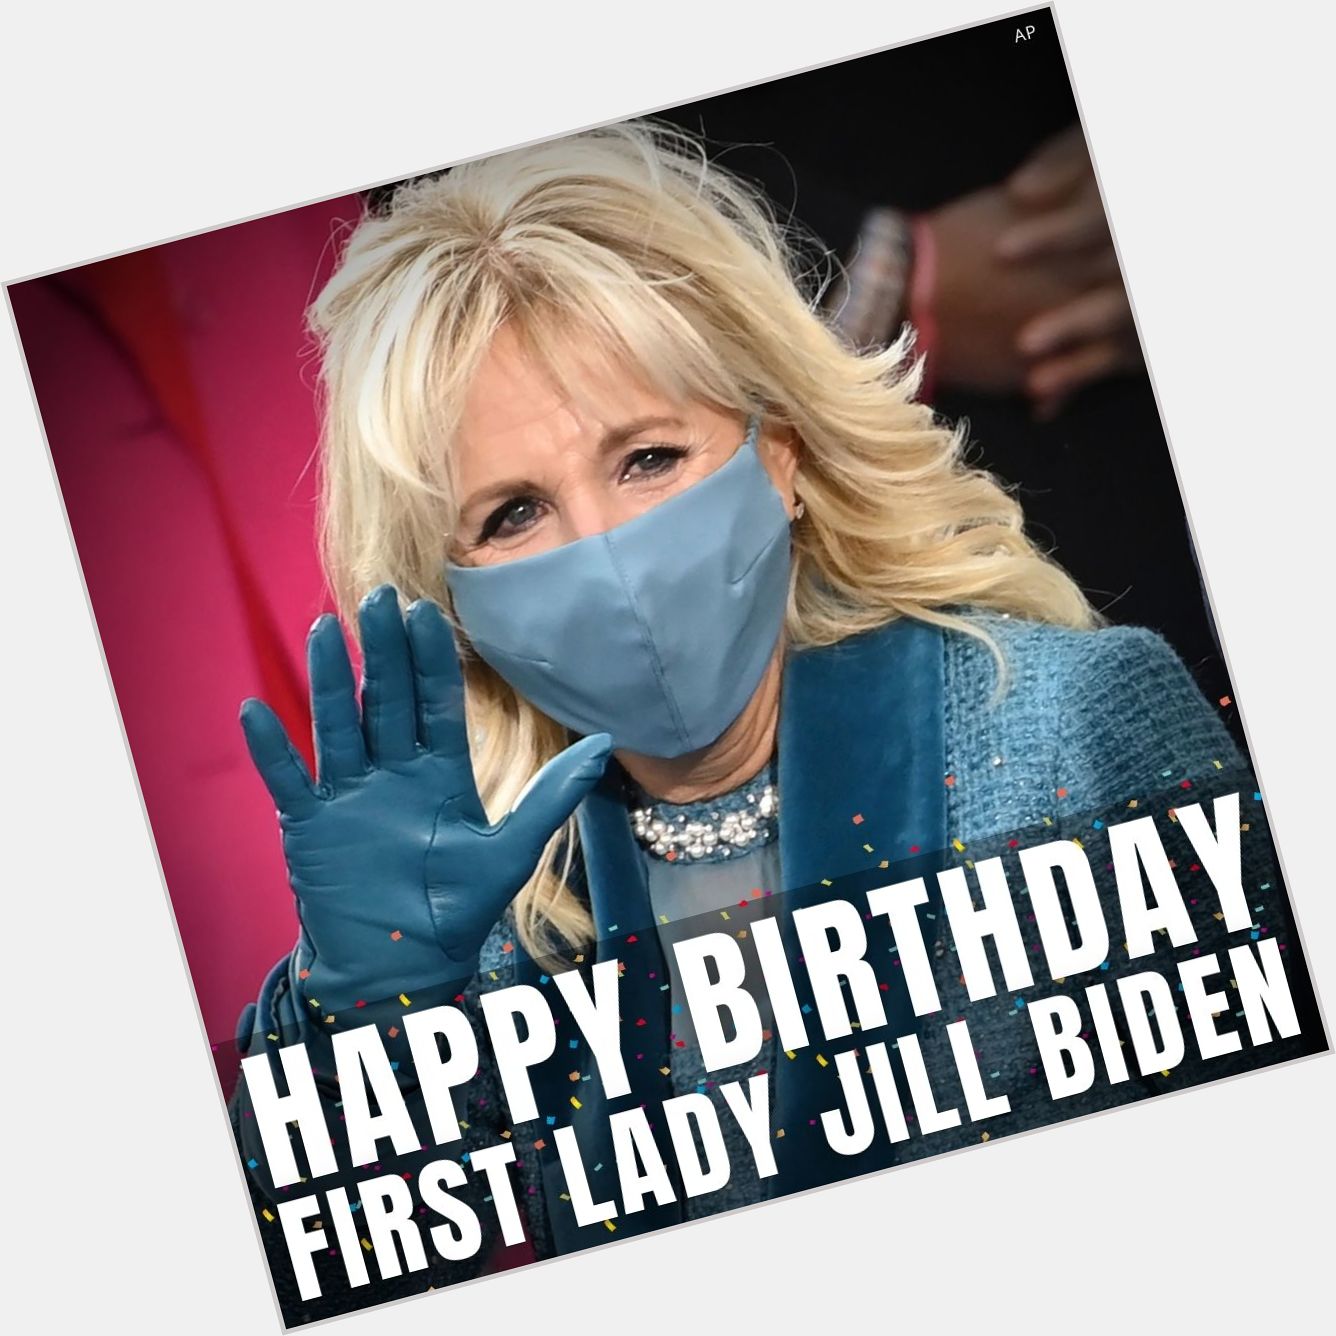    Help us wish the first lady a happy 70th birthday!  